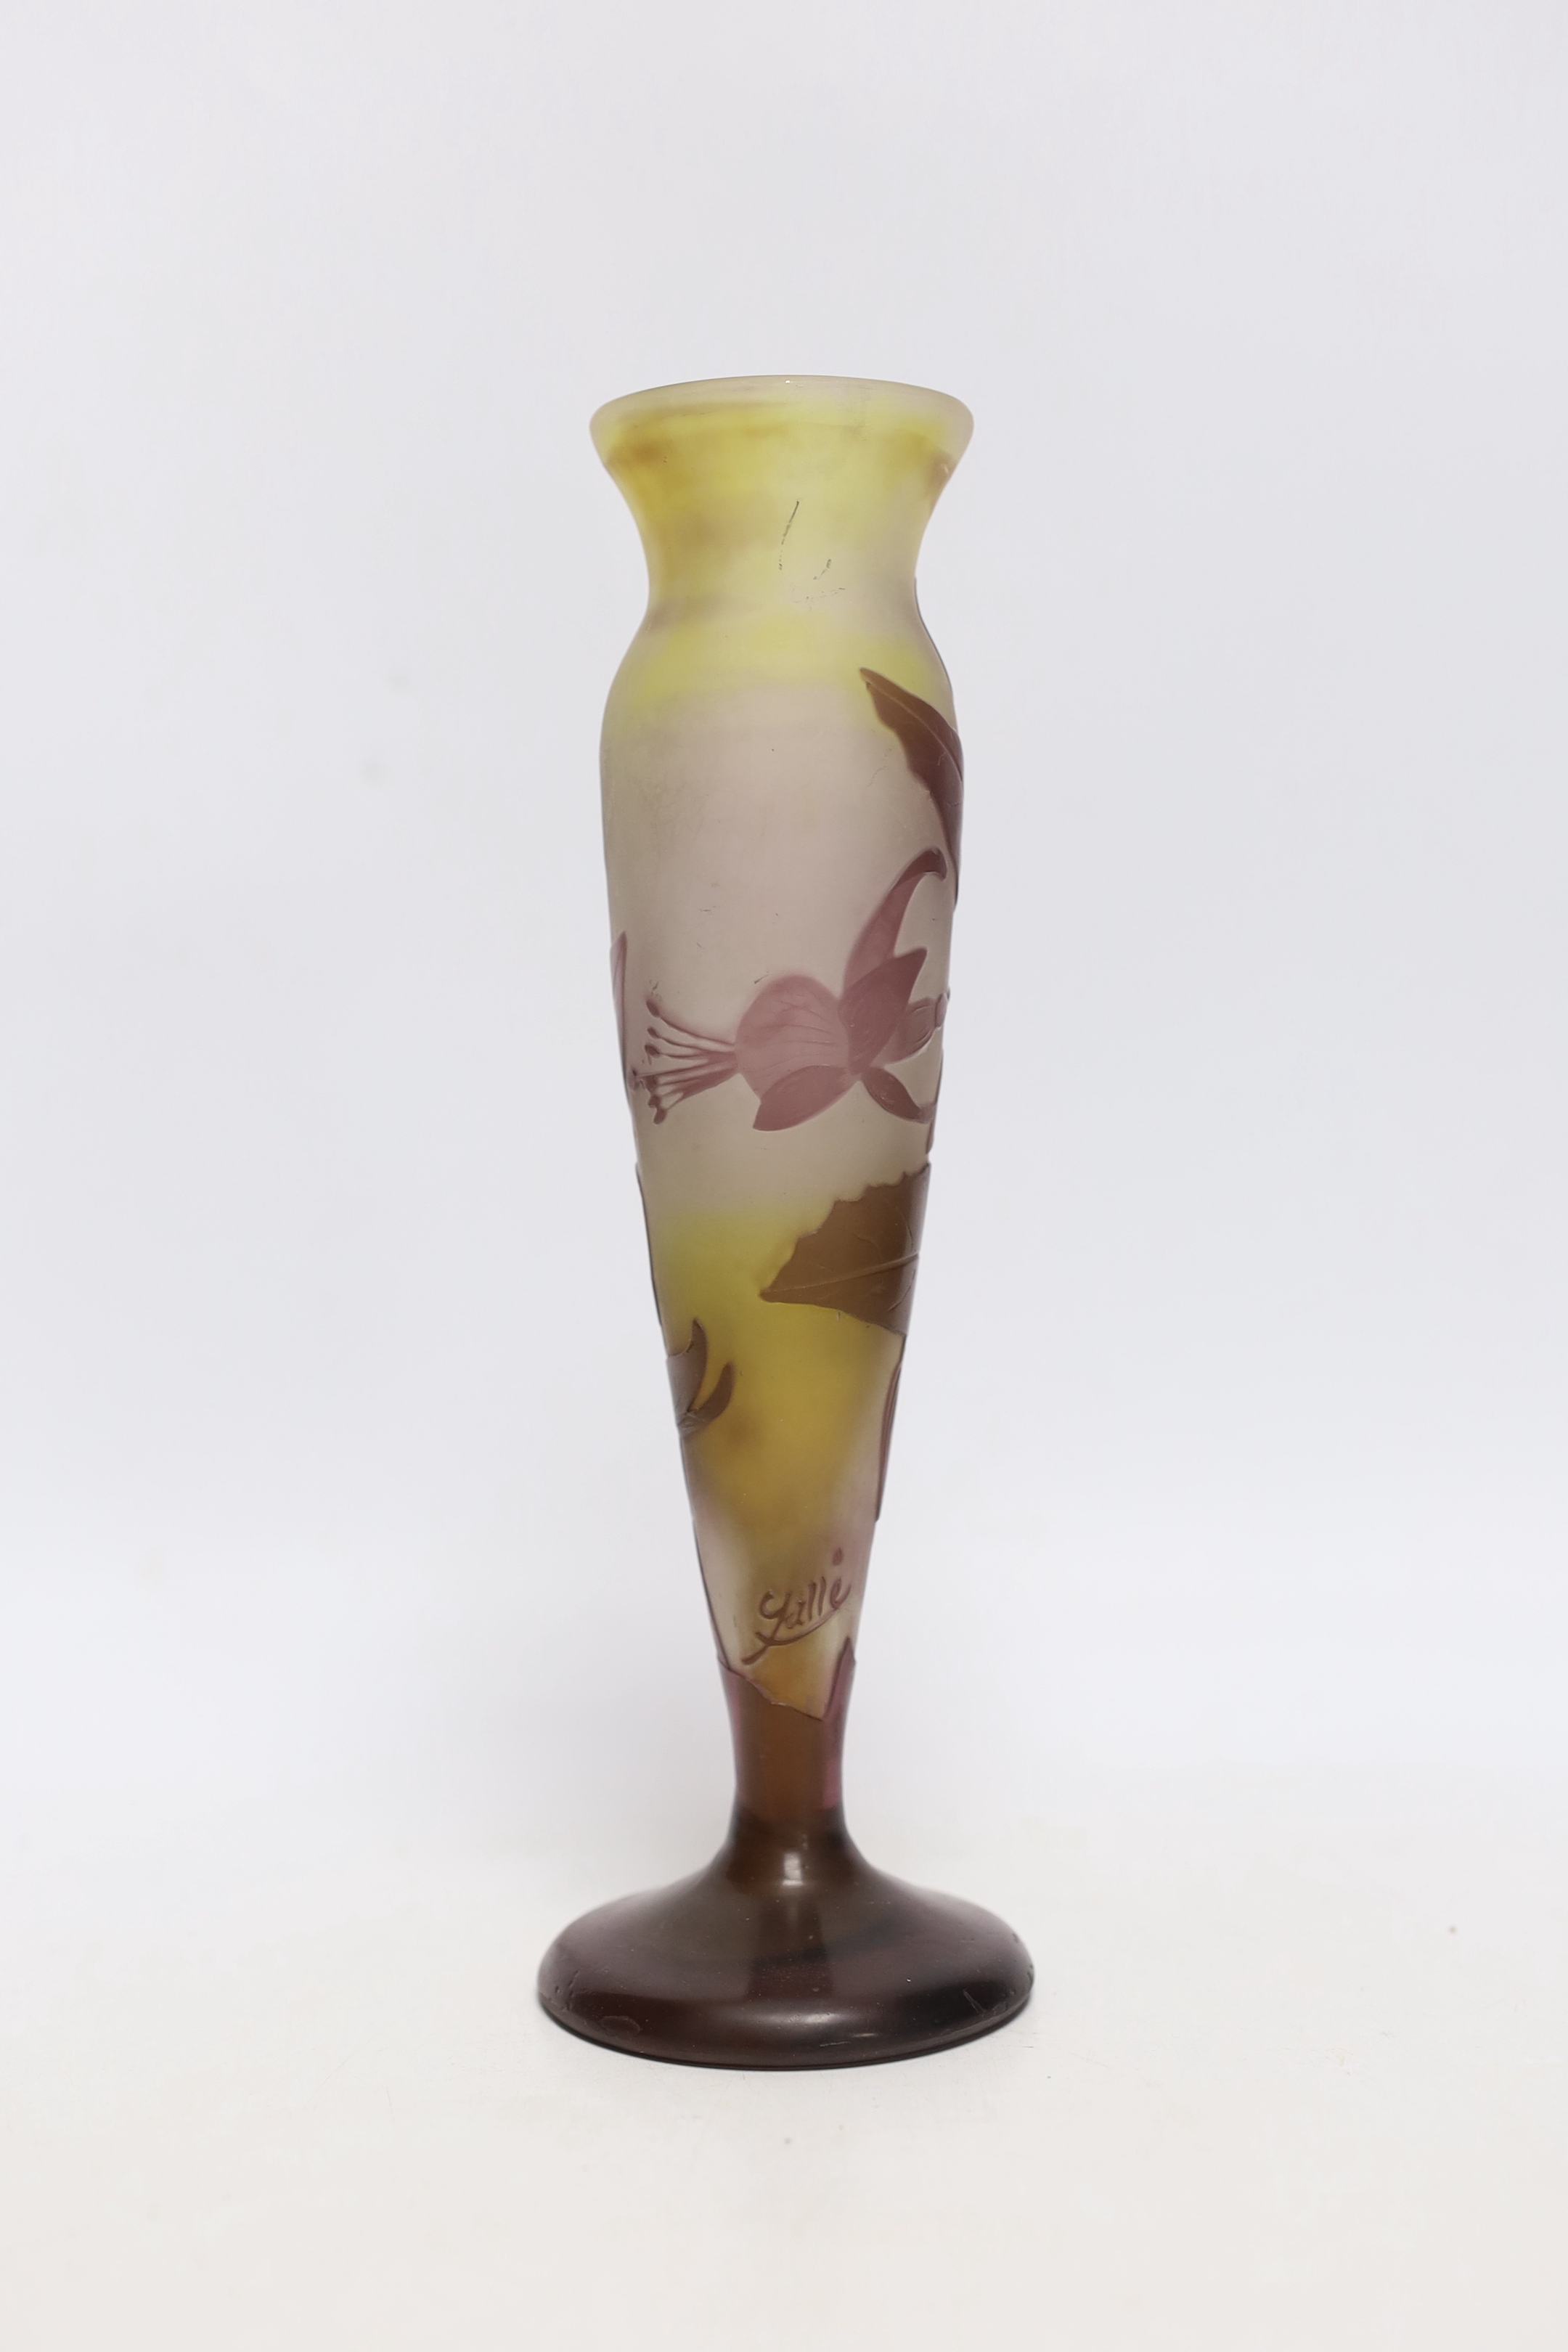 An Emile Galle cameo glass vase, signed, 24cm high - Image 2 of 2